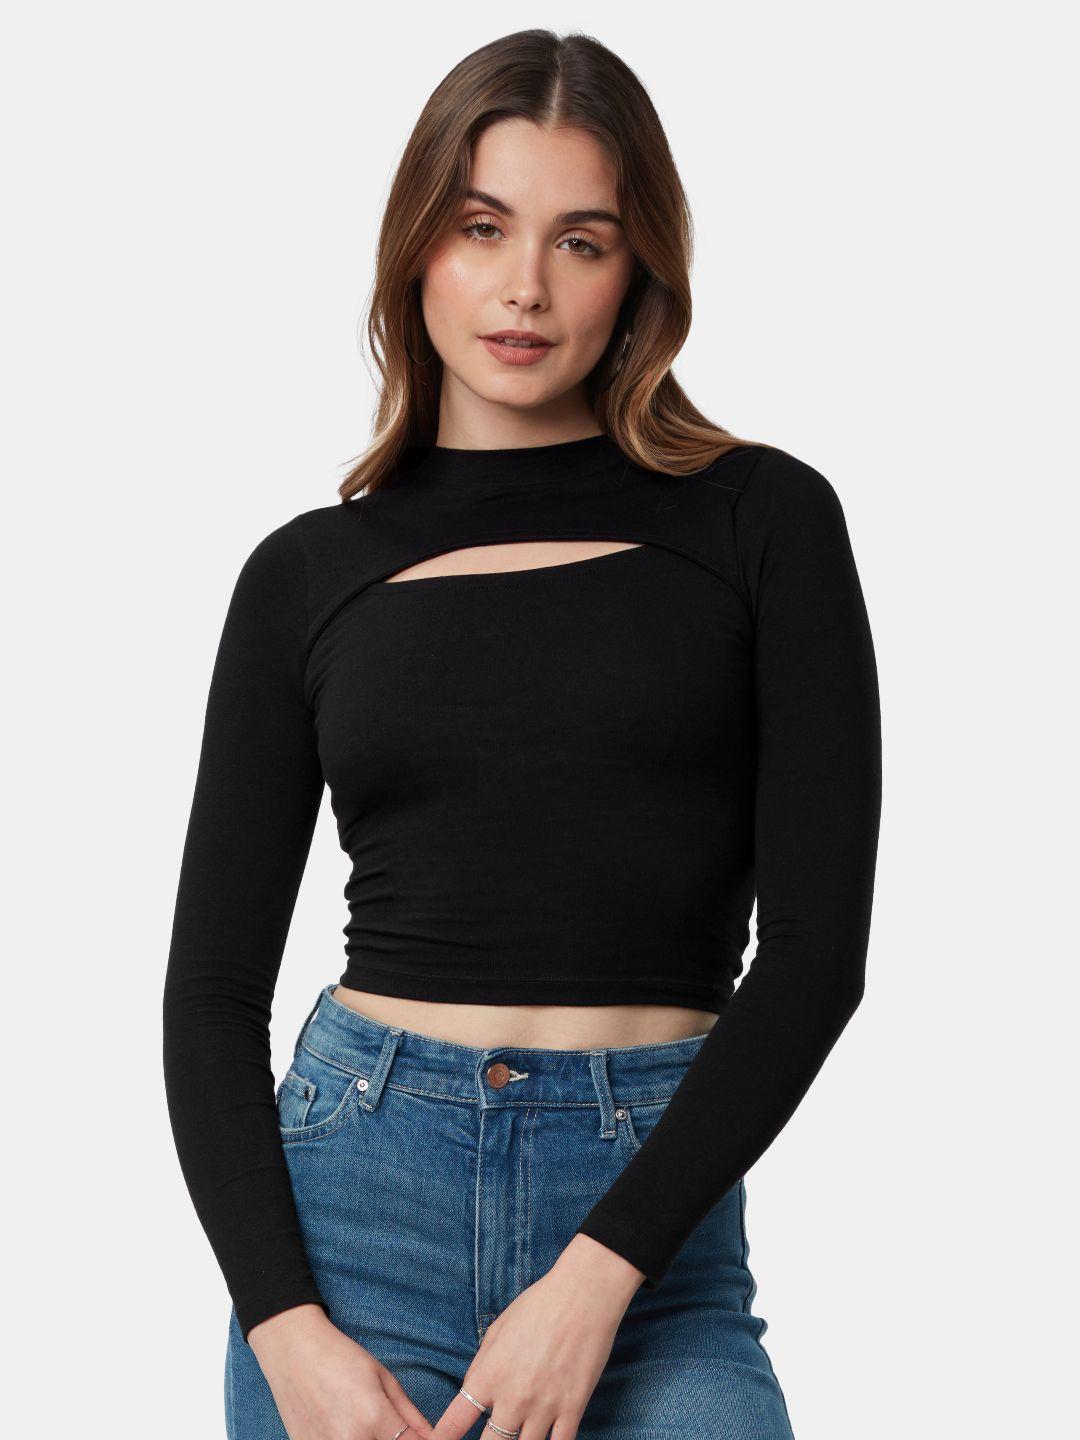 the souled store high neck cut out crop top